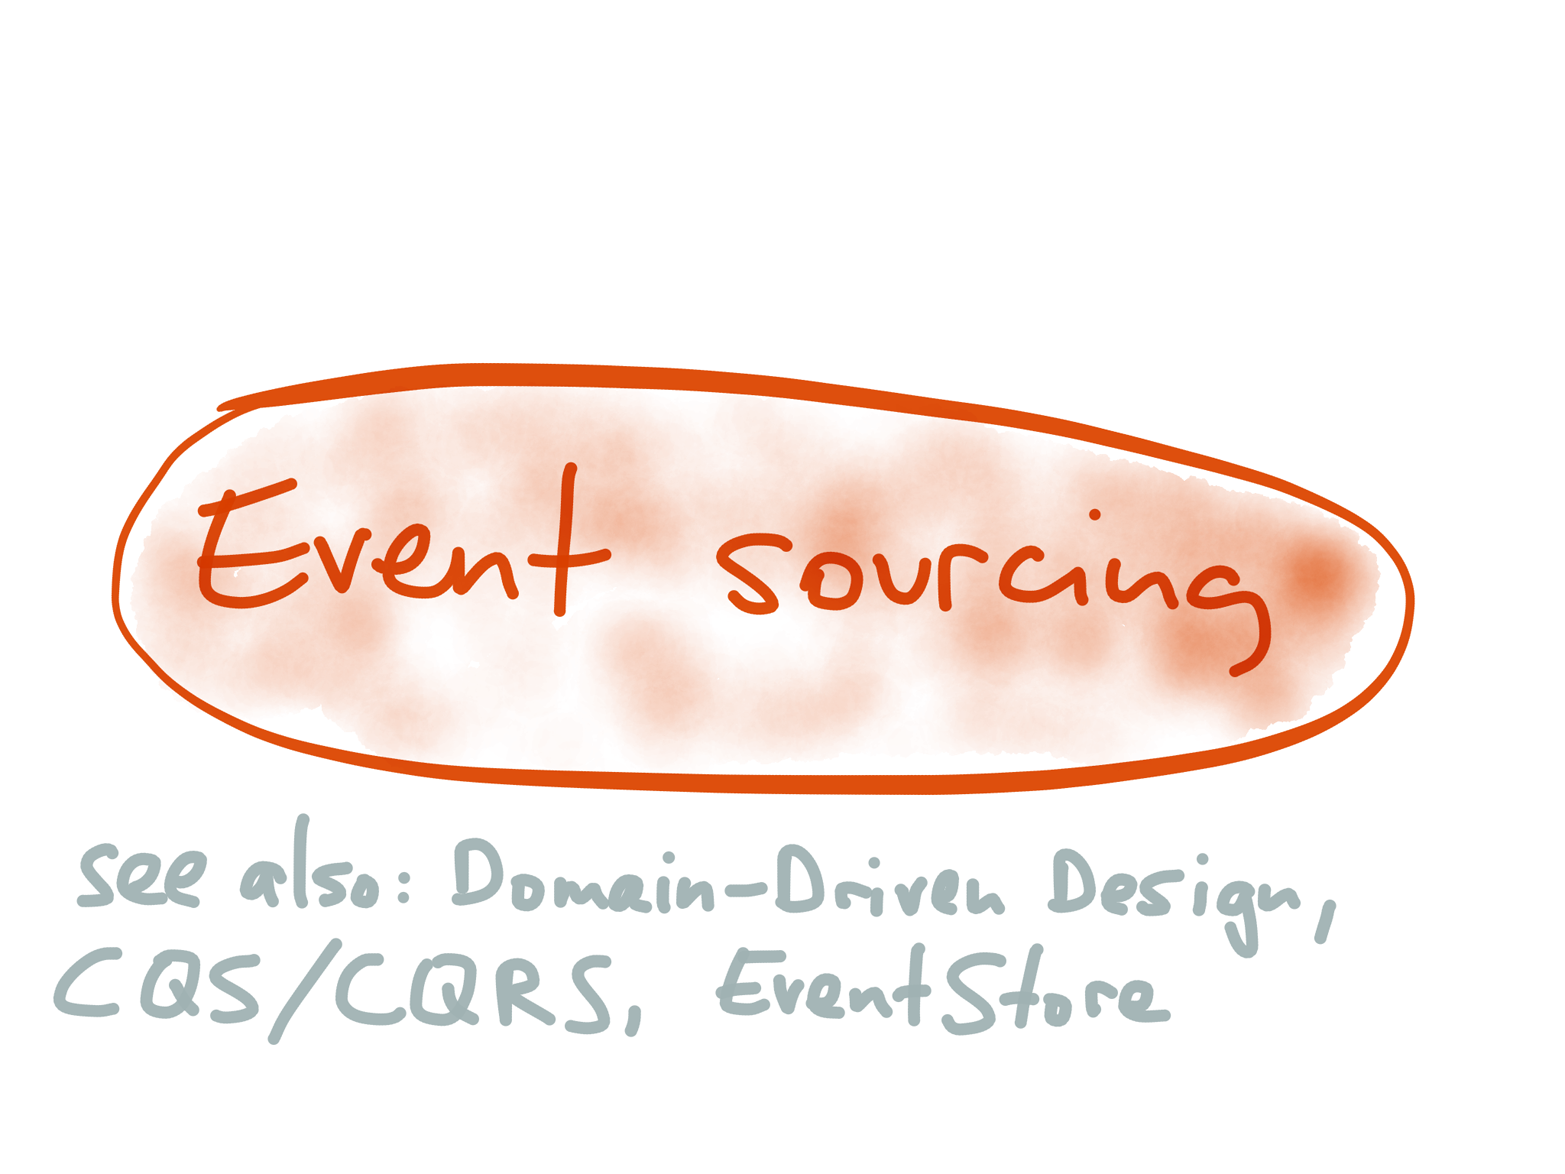 Event sourcing is an idea from the DDD community.